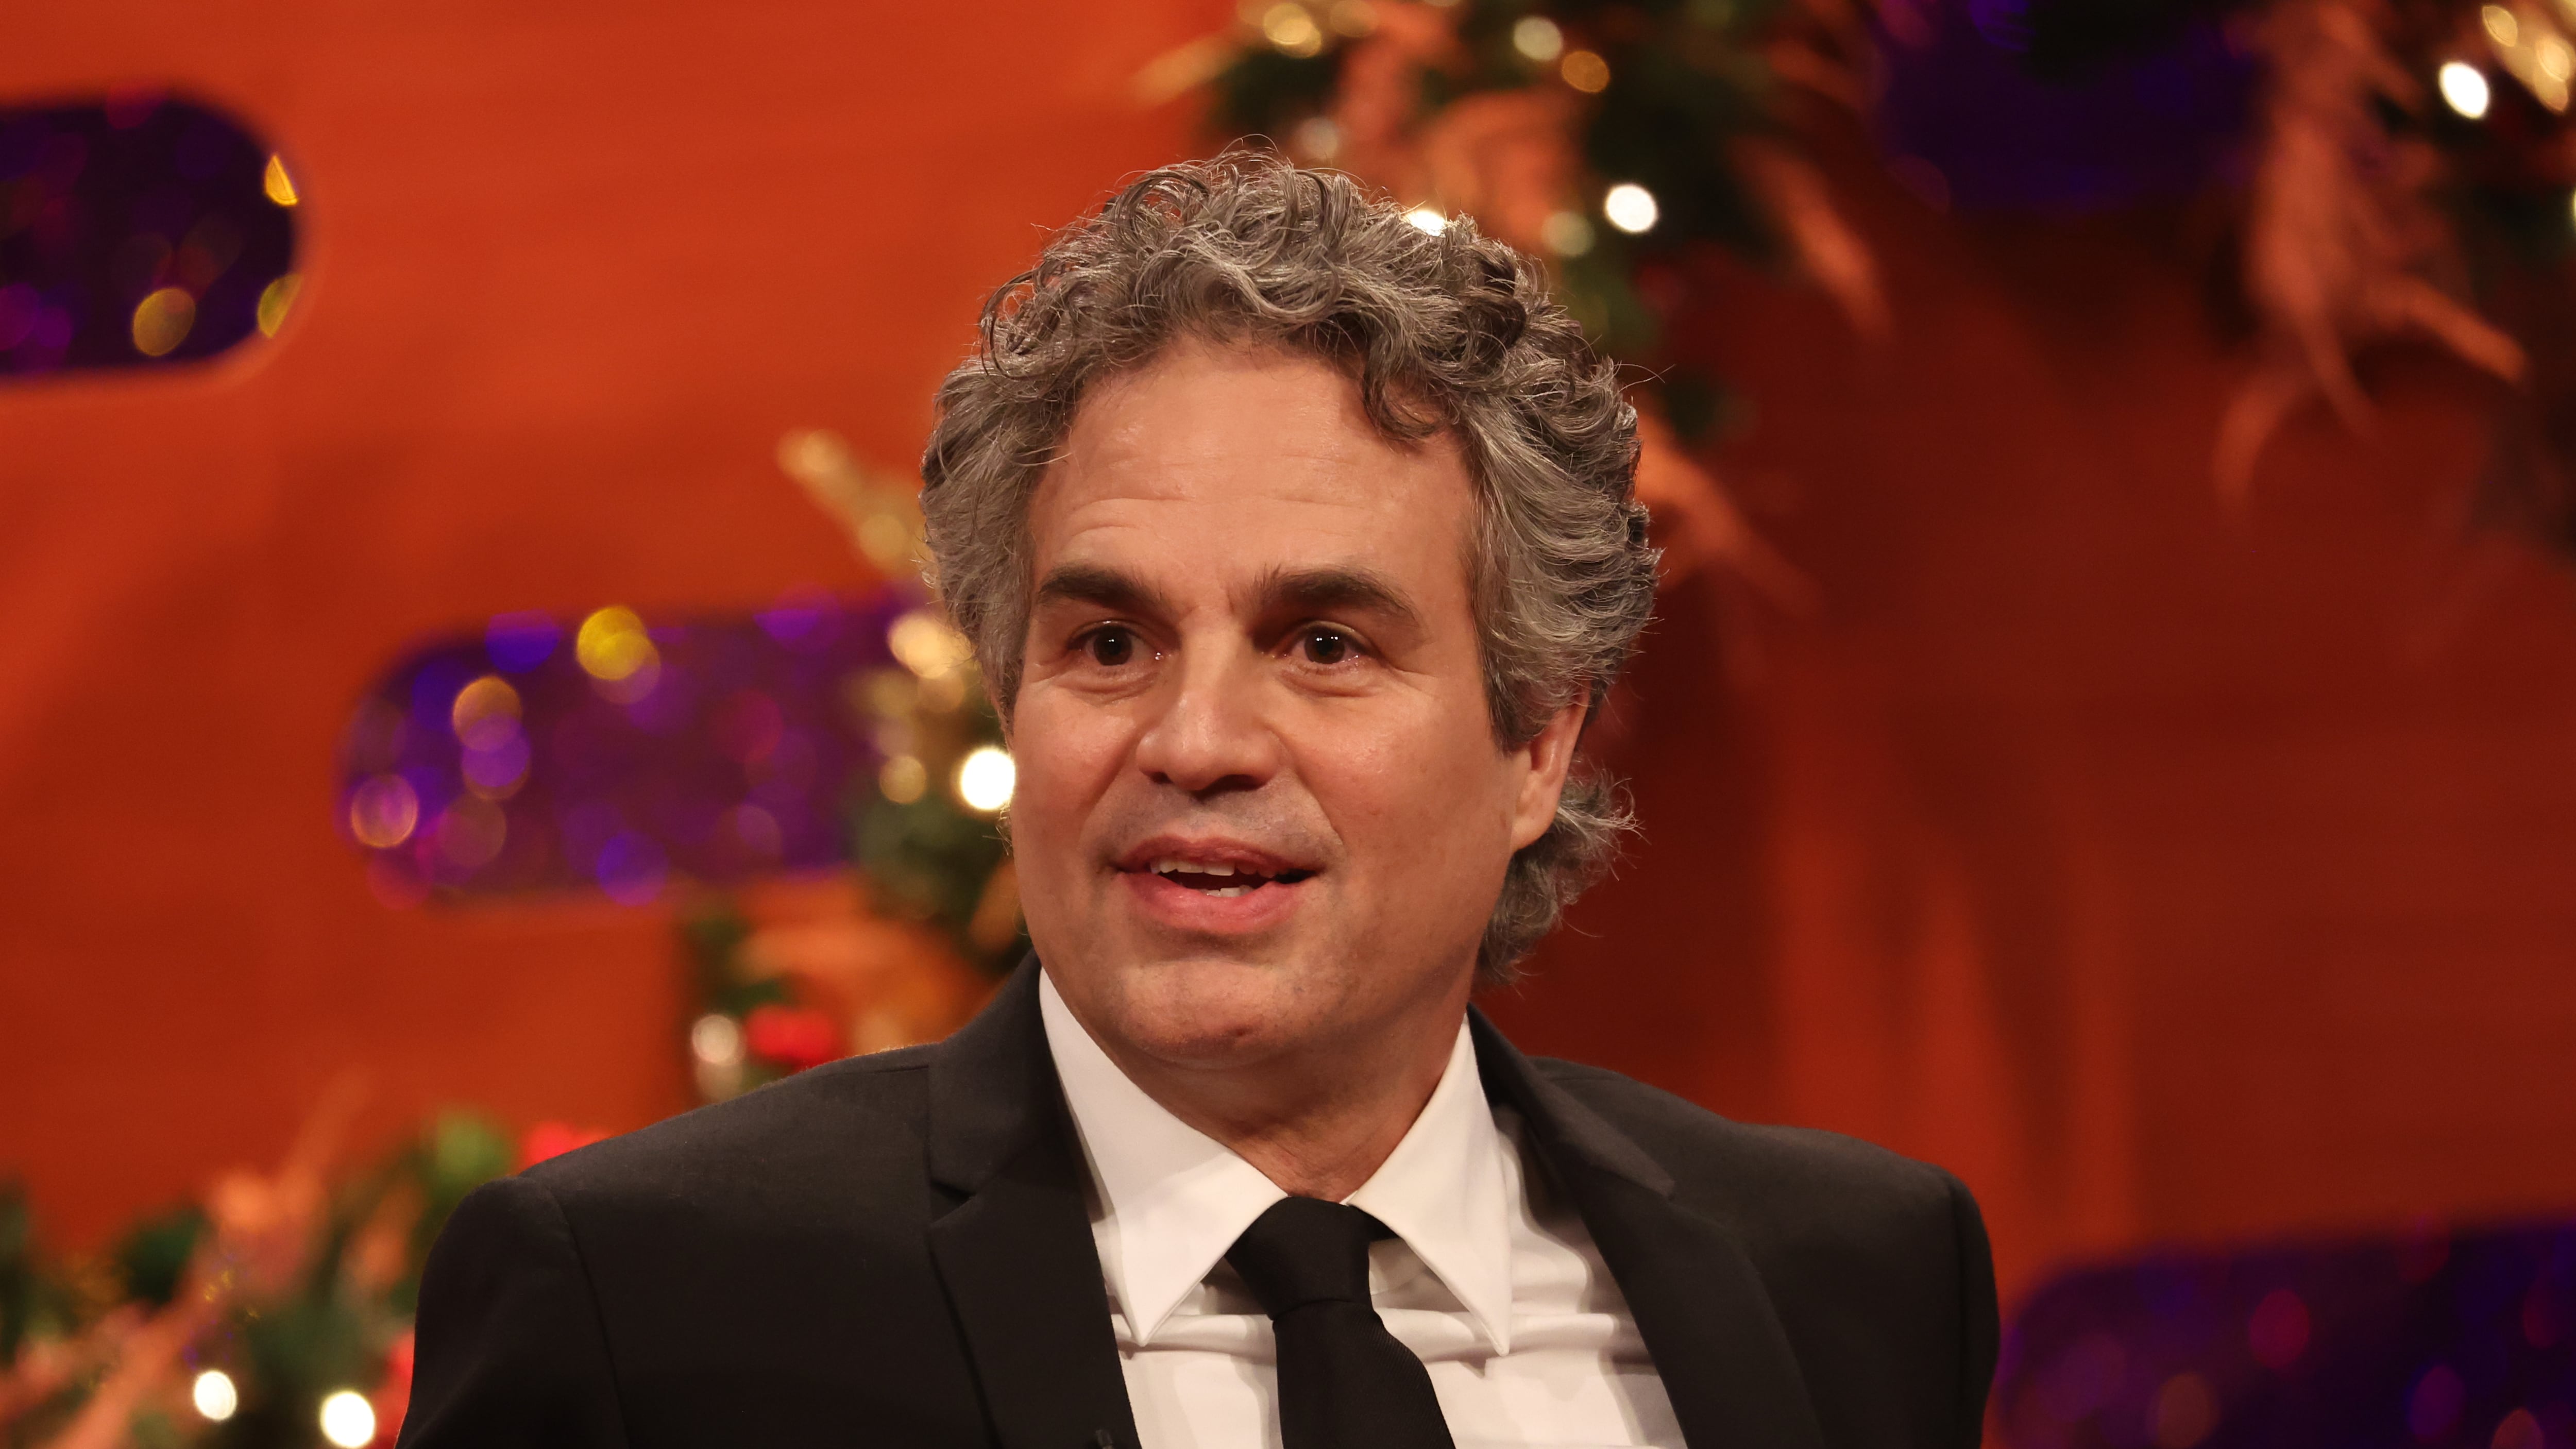 Mark Ruffalo bought a Hulk action figure on eBay as he had ‘run out of stuff’ to donate